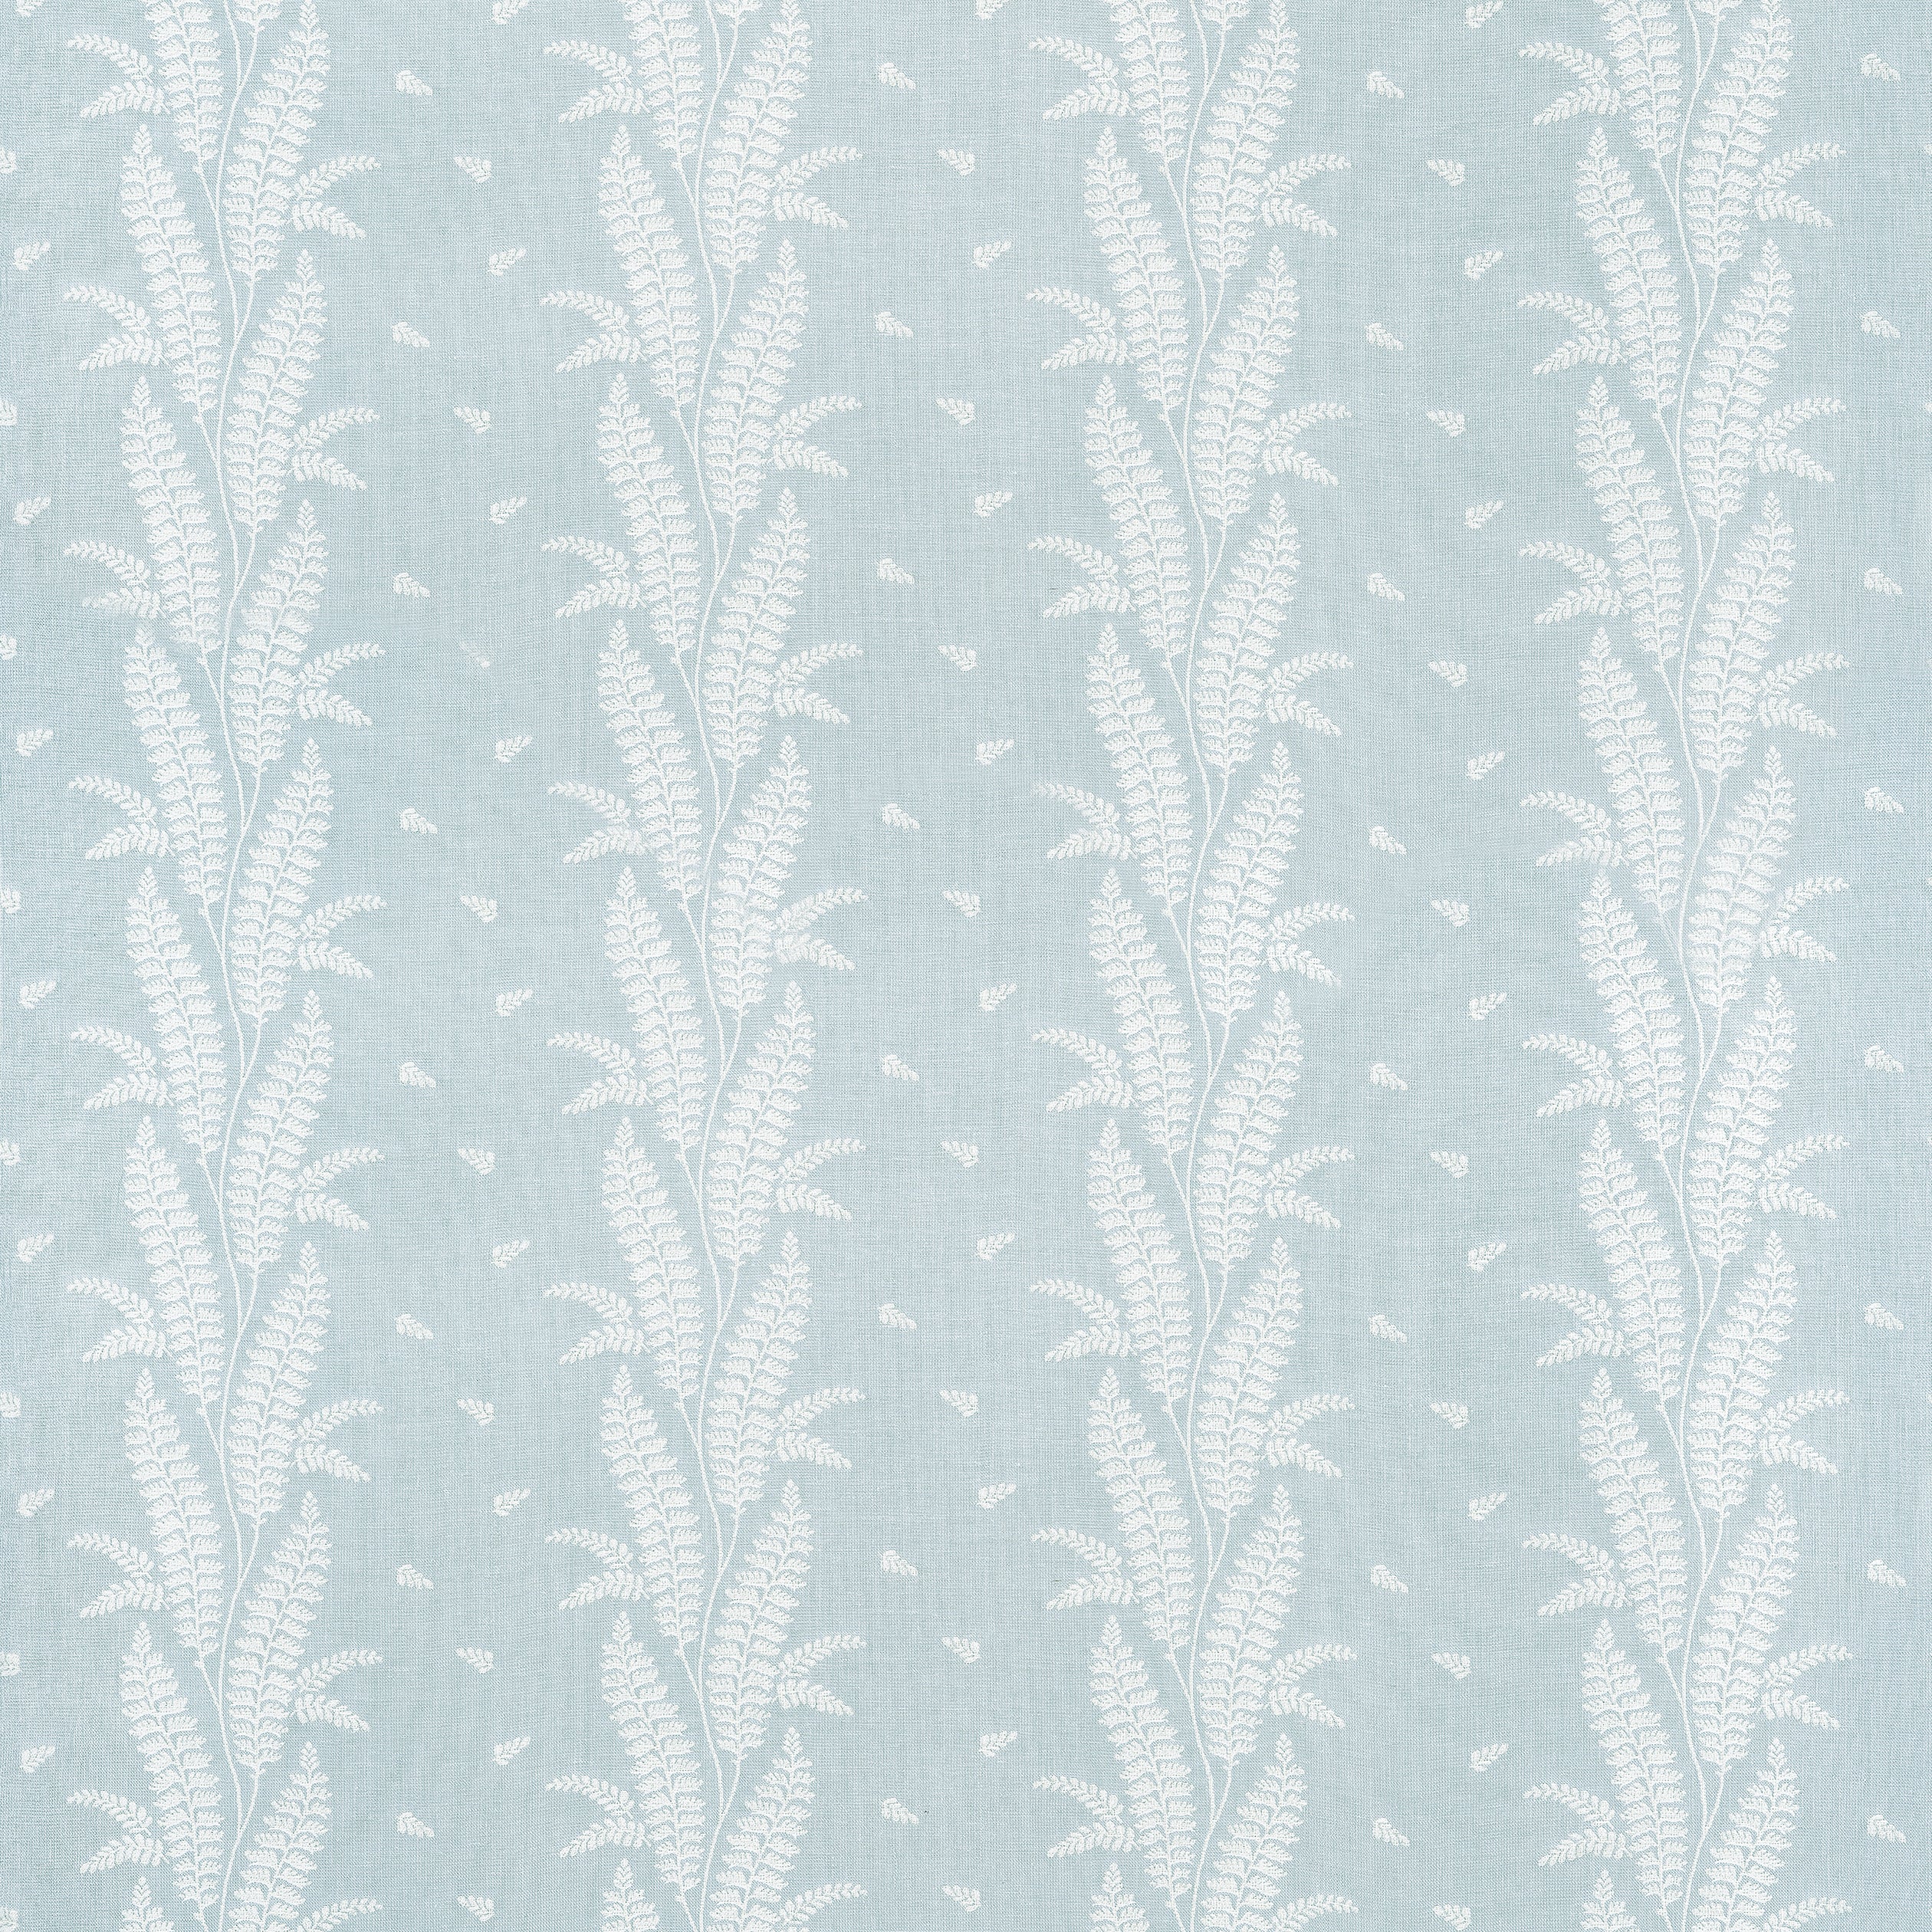 Ensbury Fern fabric in soft blue color - pattern number AW57825 - by Anna French in the Bristol collection